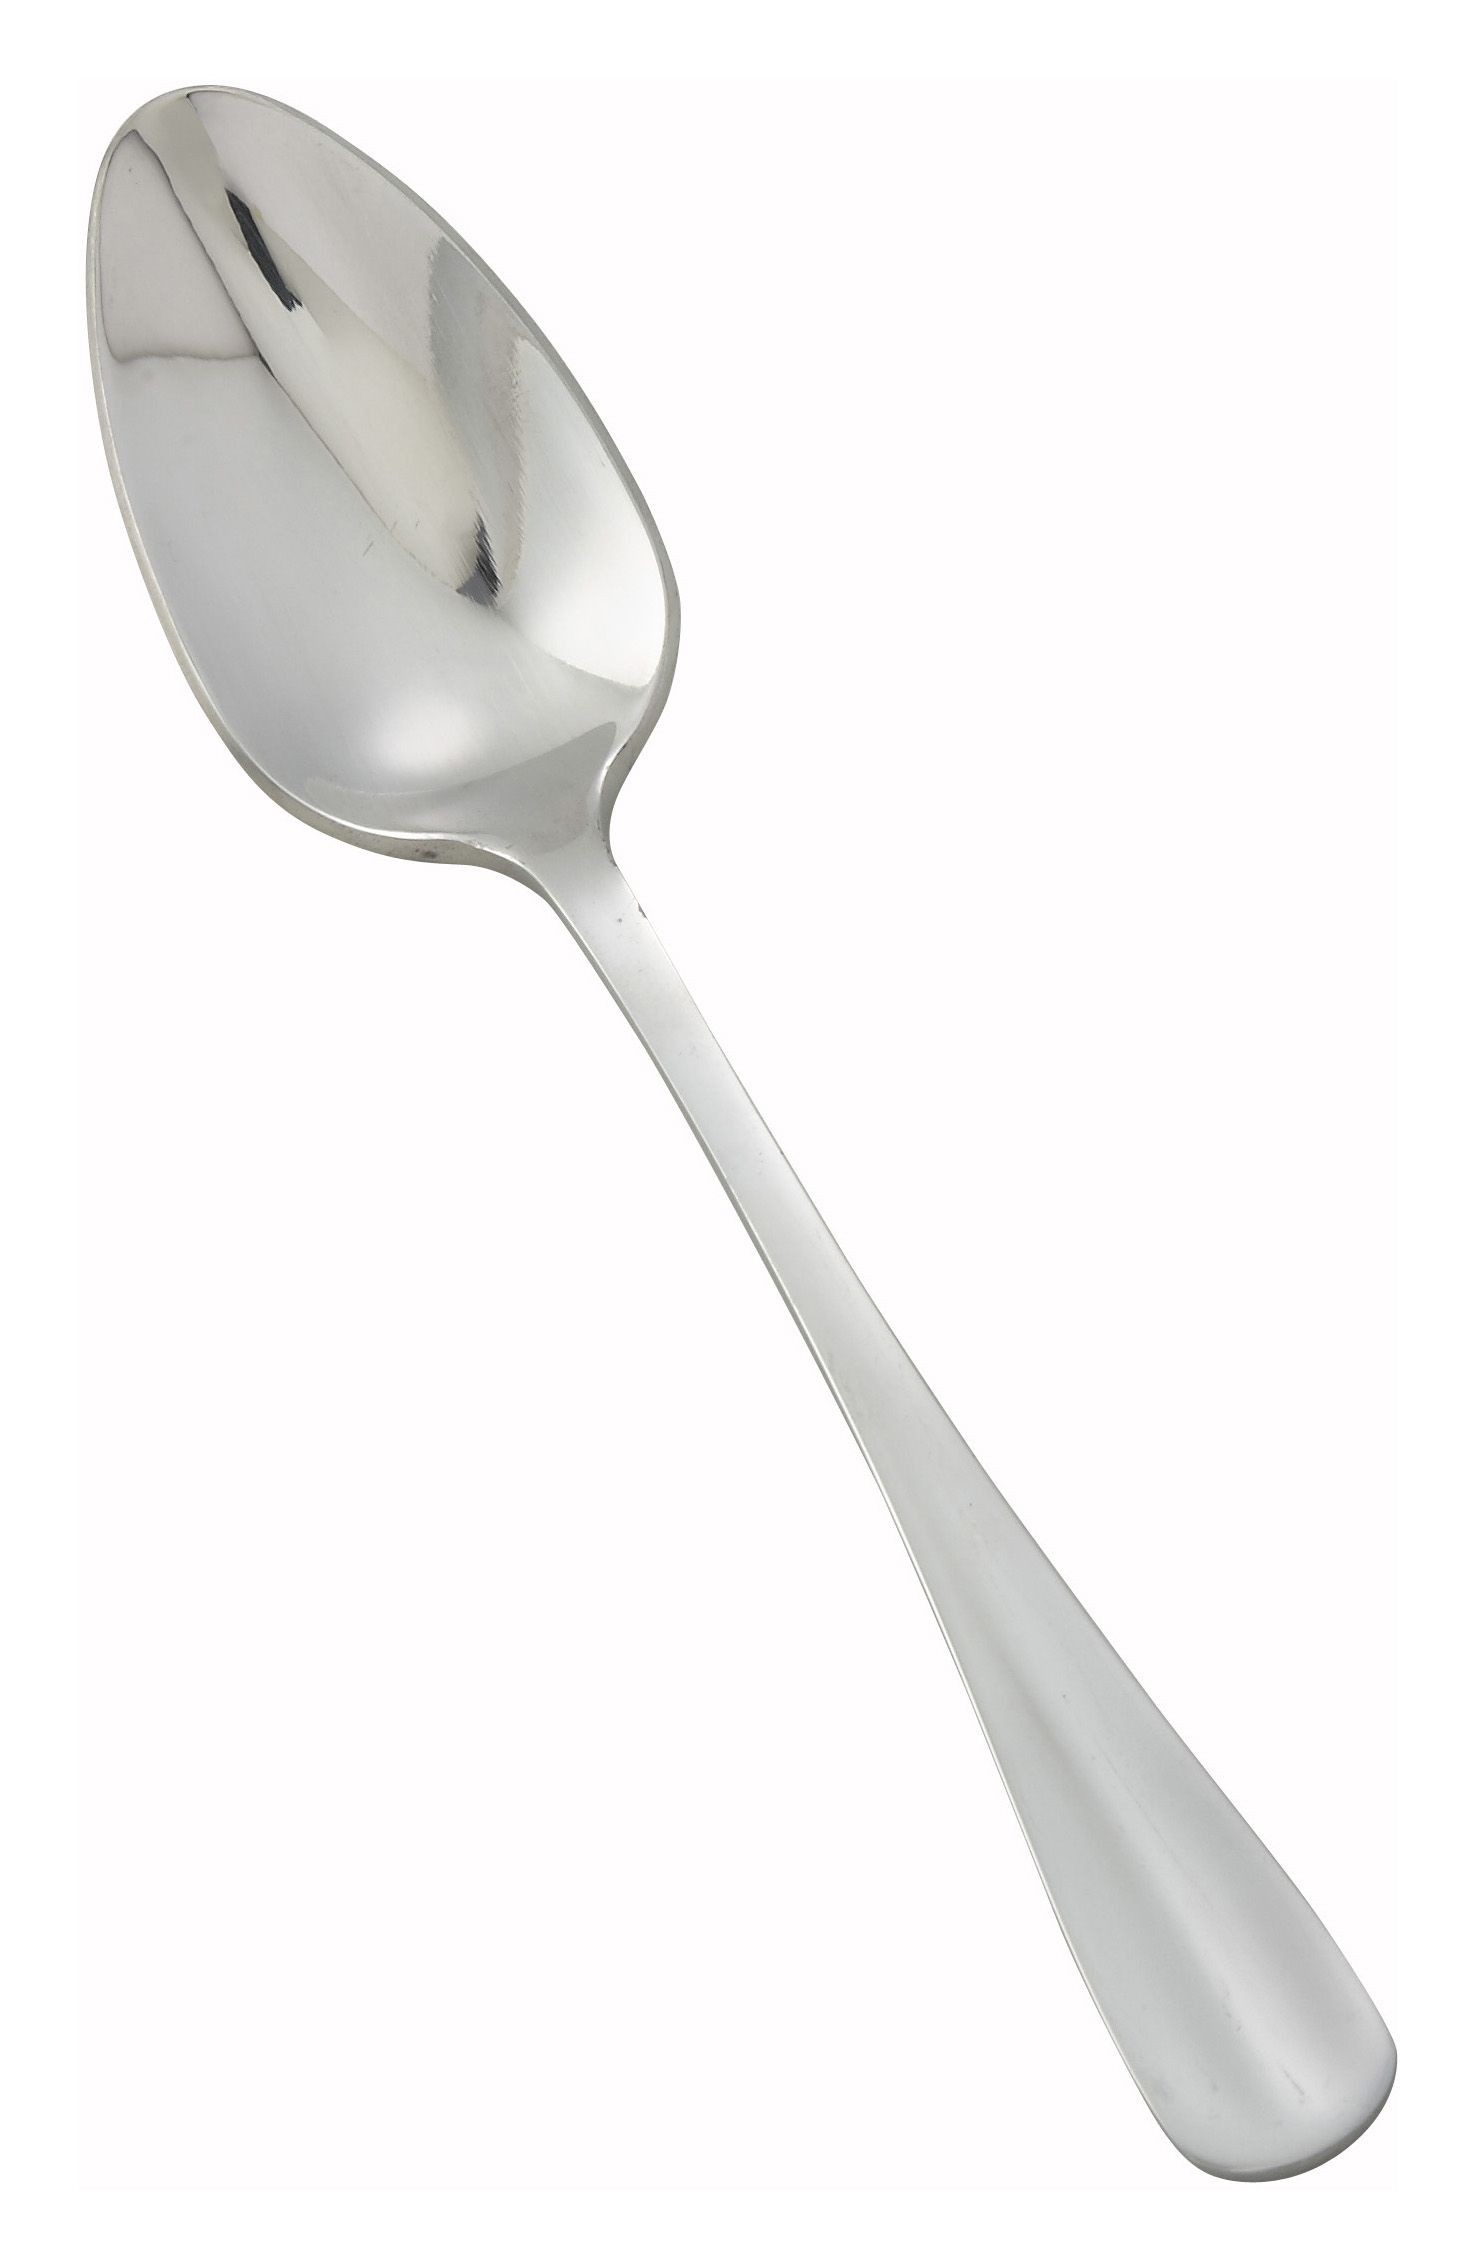 Winco 0034-03 Stanford Extra Heavy Stainless Steel Dinner Spoon (12/Pack)